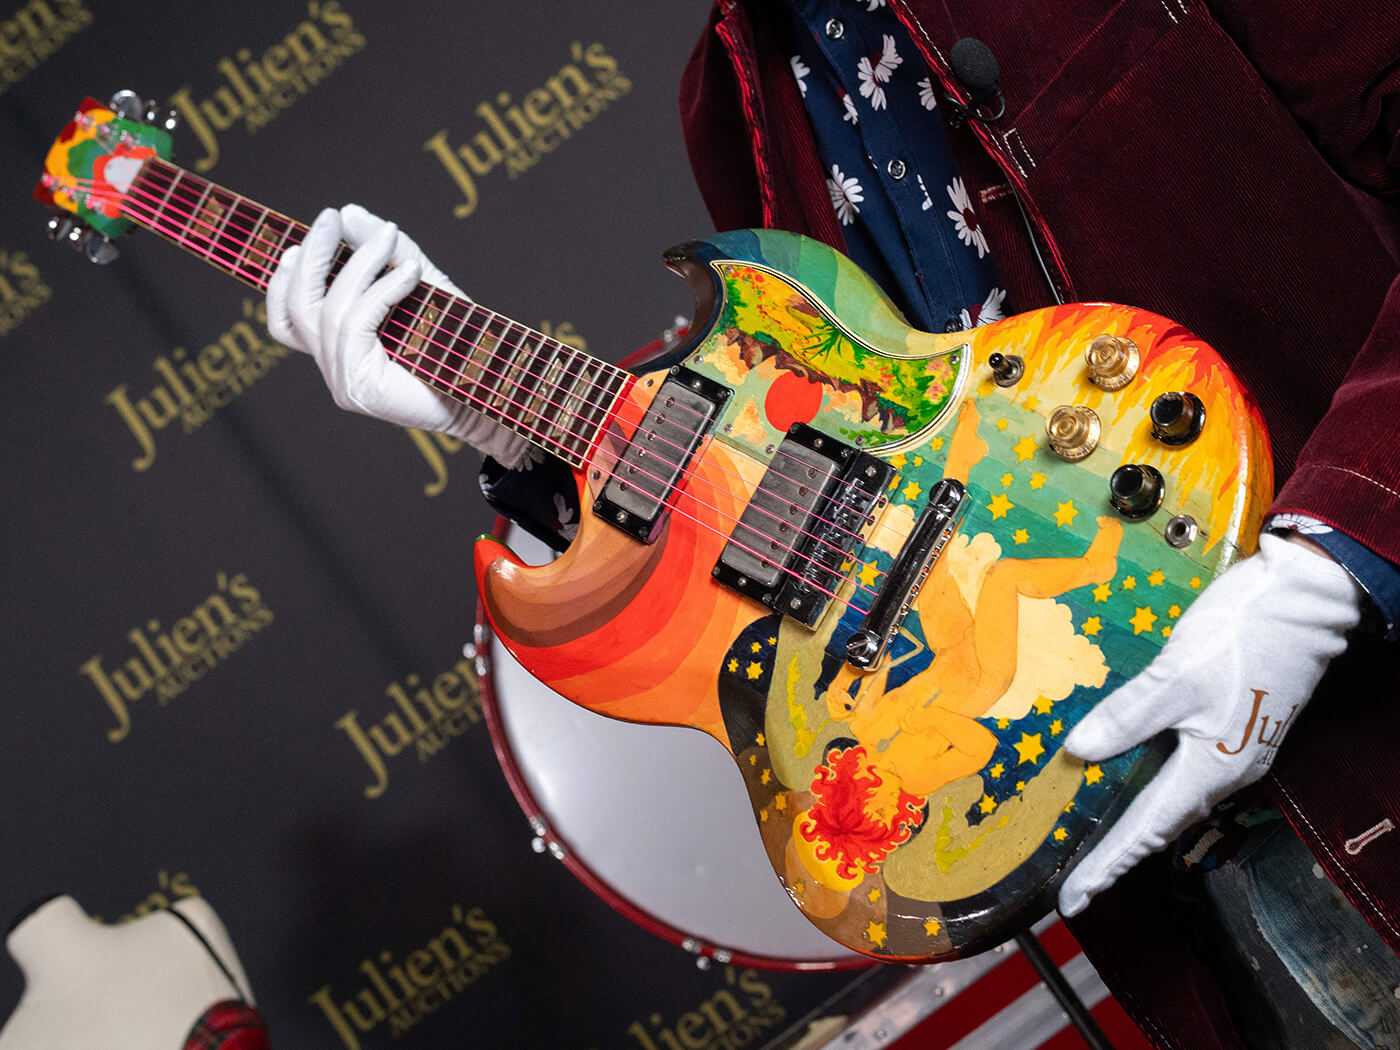 Eric Clapton’s Fool guitar at the media preview for Julien’s “Played, worn, torn rock ‘n’ roll iconic guitars and memorabilia” in 2023, photo by Valerie Macon/AFP via Getty Images